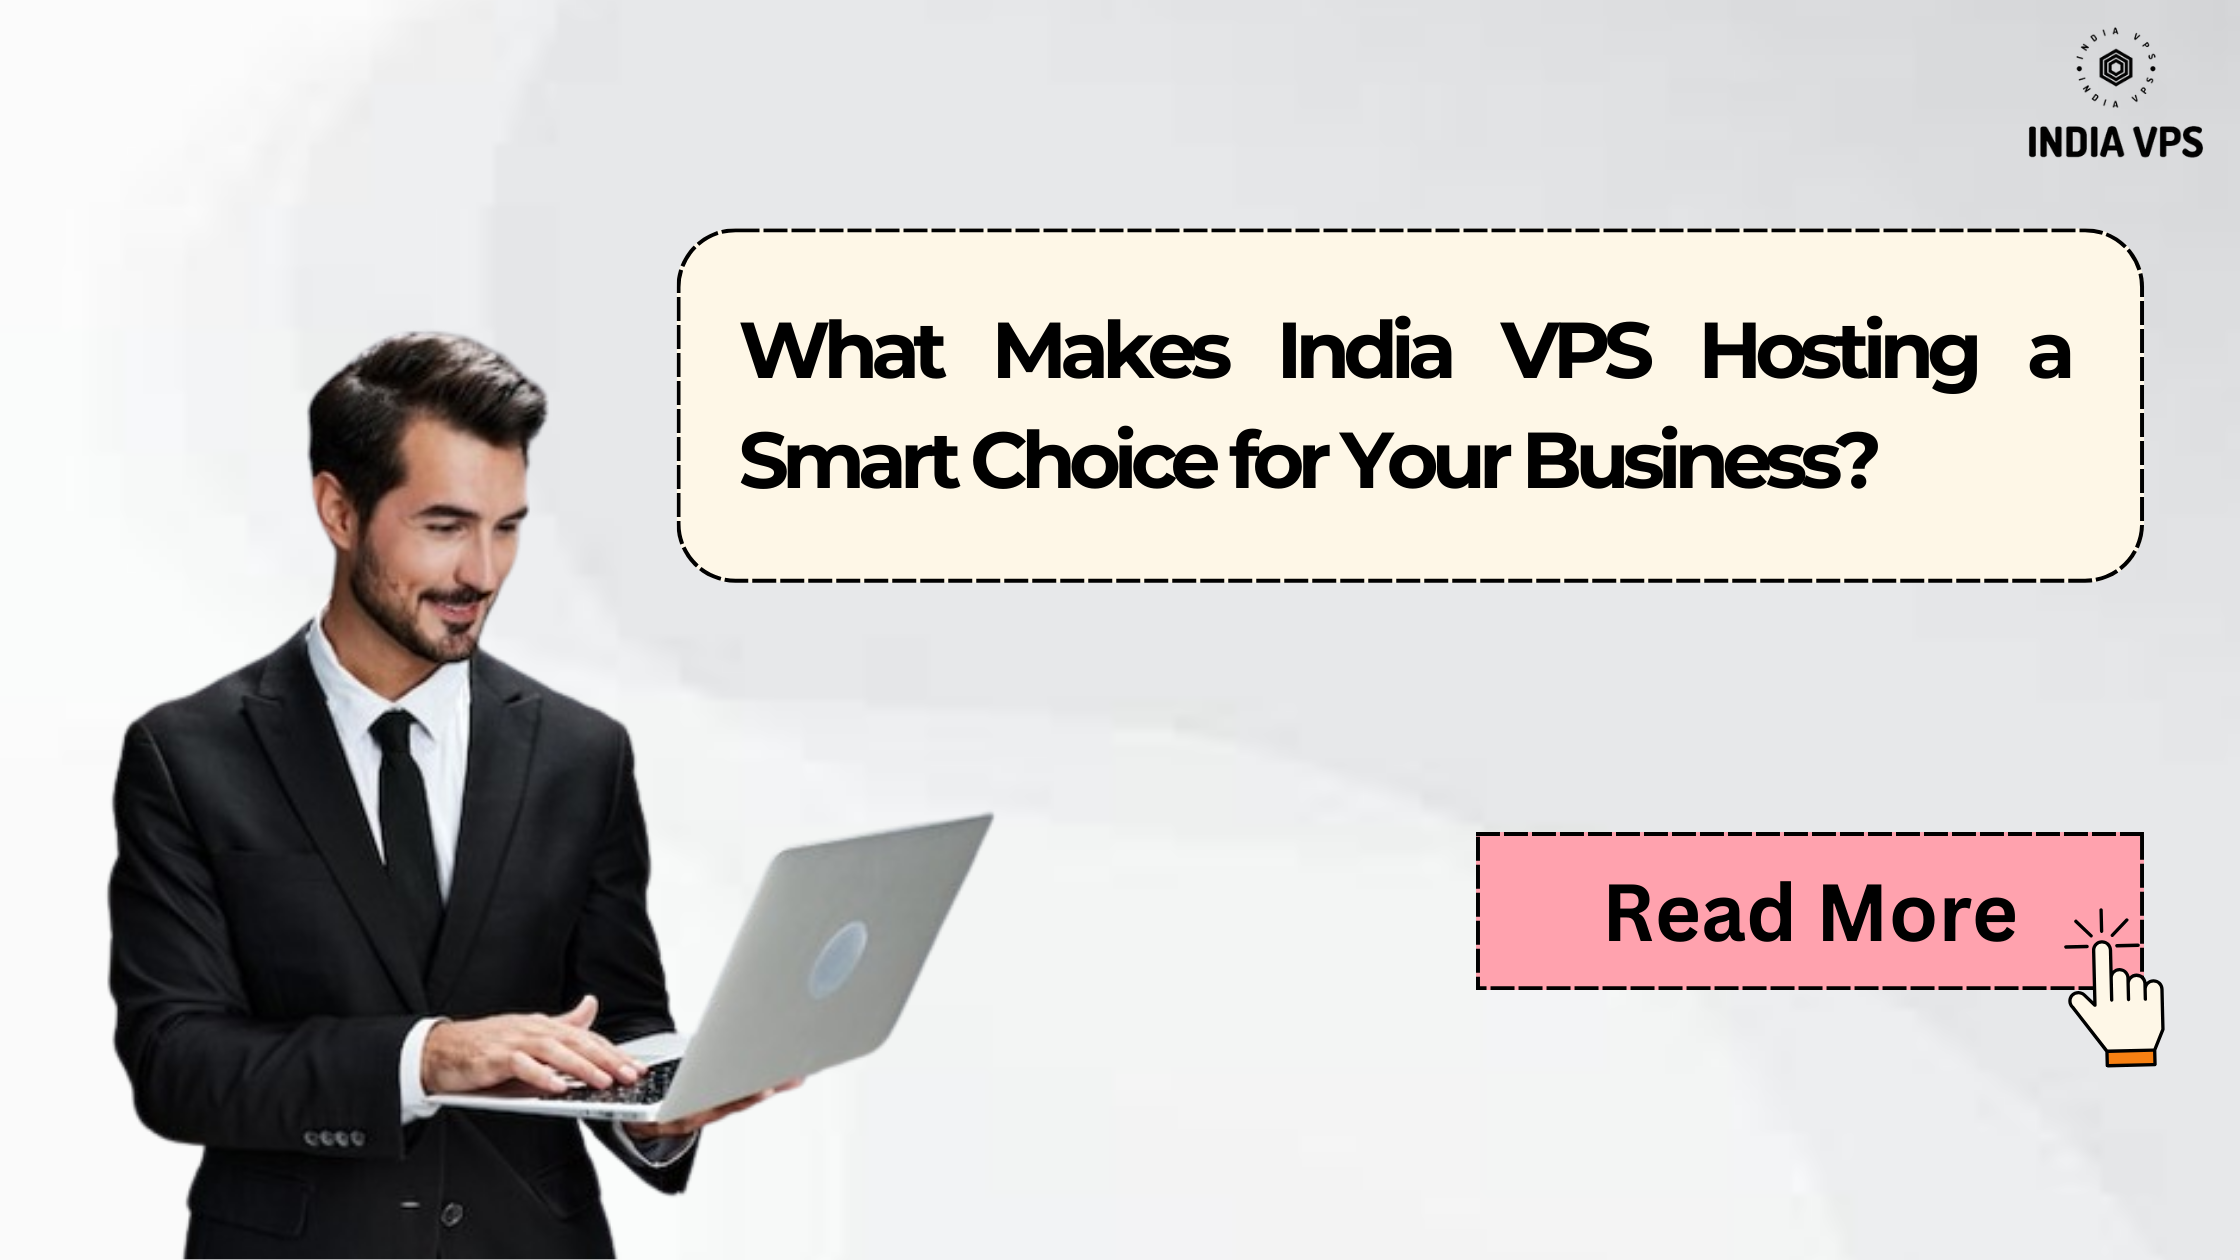 What Makes India VPS Hosting a Smart Choice for Your Business